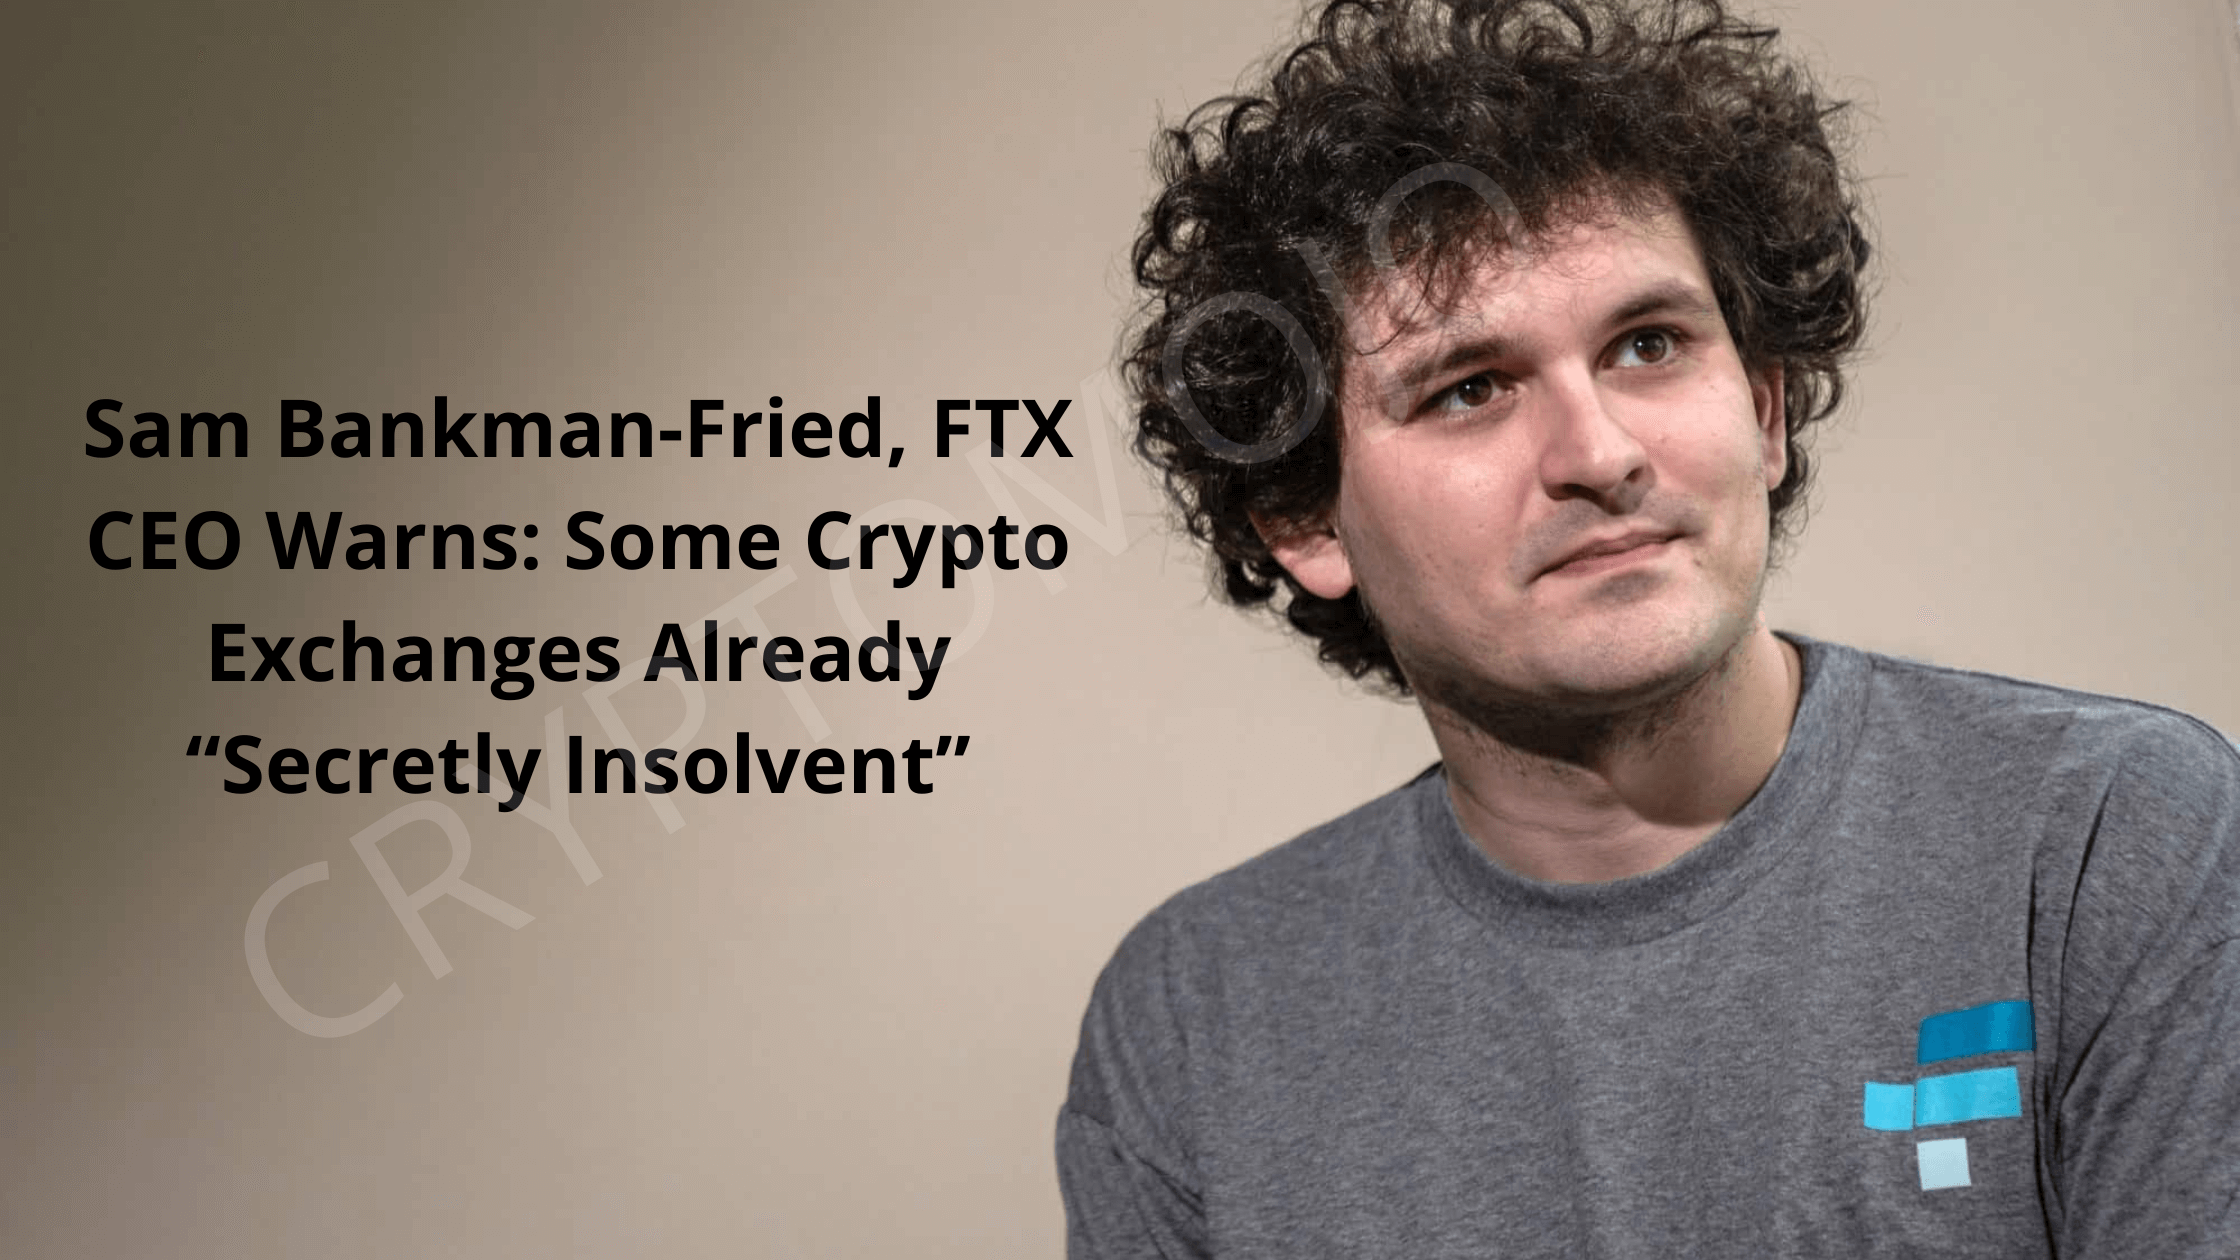 Sam Bankman-Fried, FTX CEO Warns Some Crypto Exchanges Already “Secretly Insolvent”